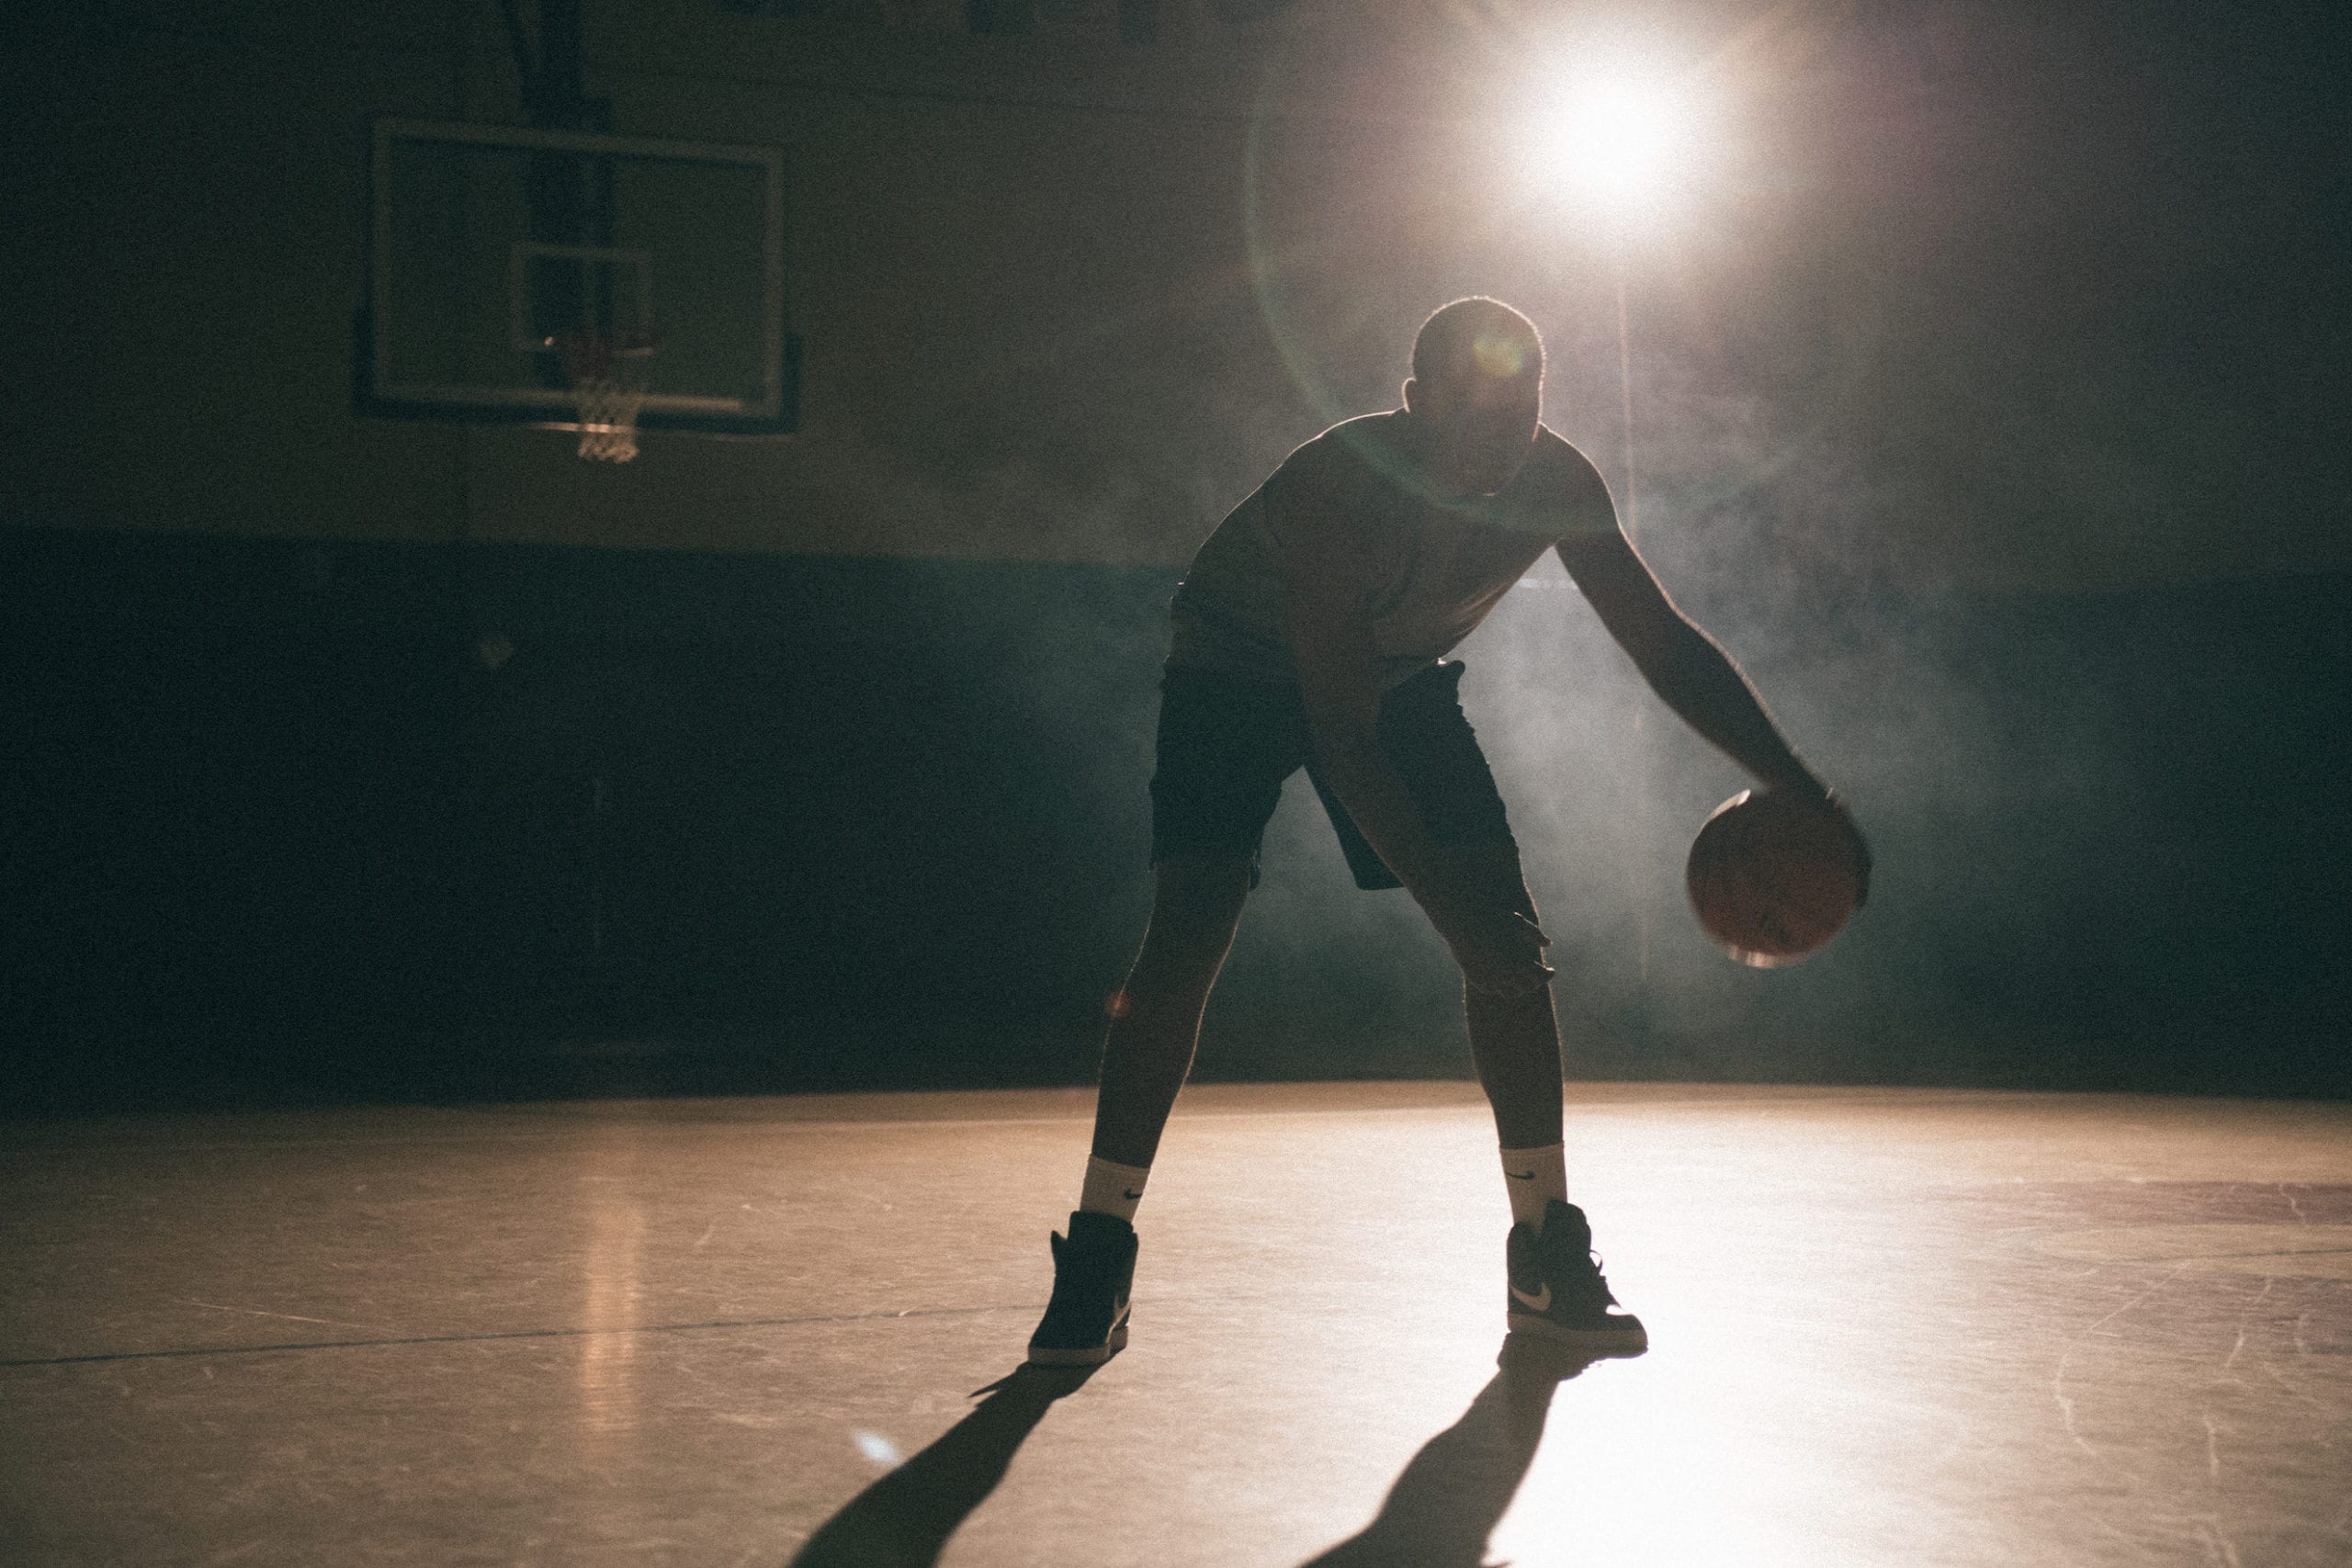 IU C&I Studios PortfolioNike Creative photography An African American man poised holding a basketball on a basketball court with a light shining on him in semi darkness